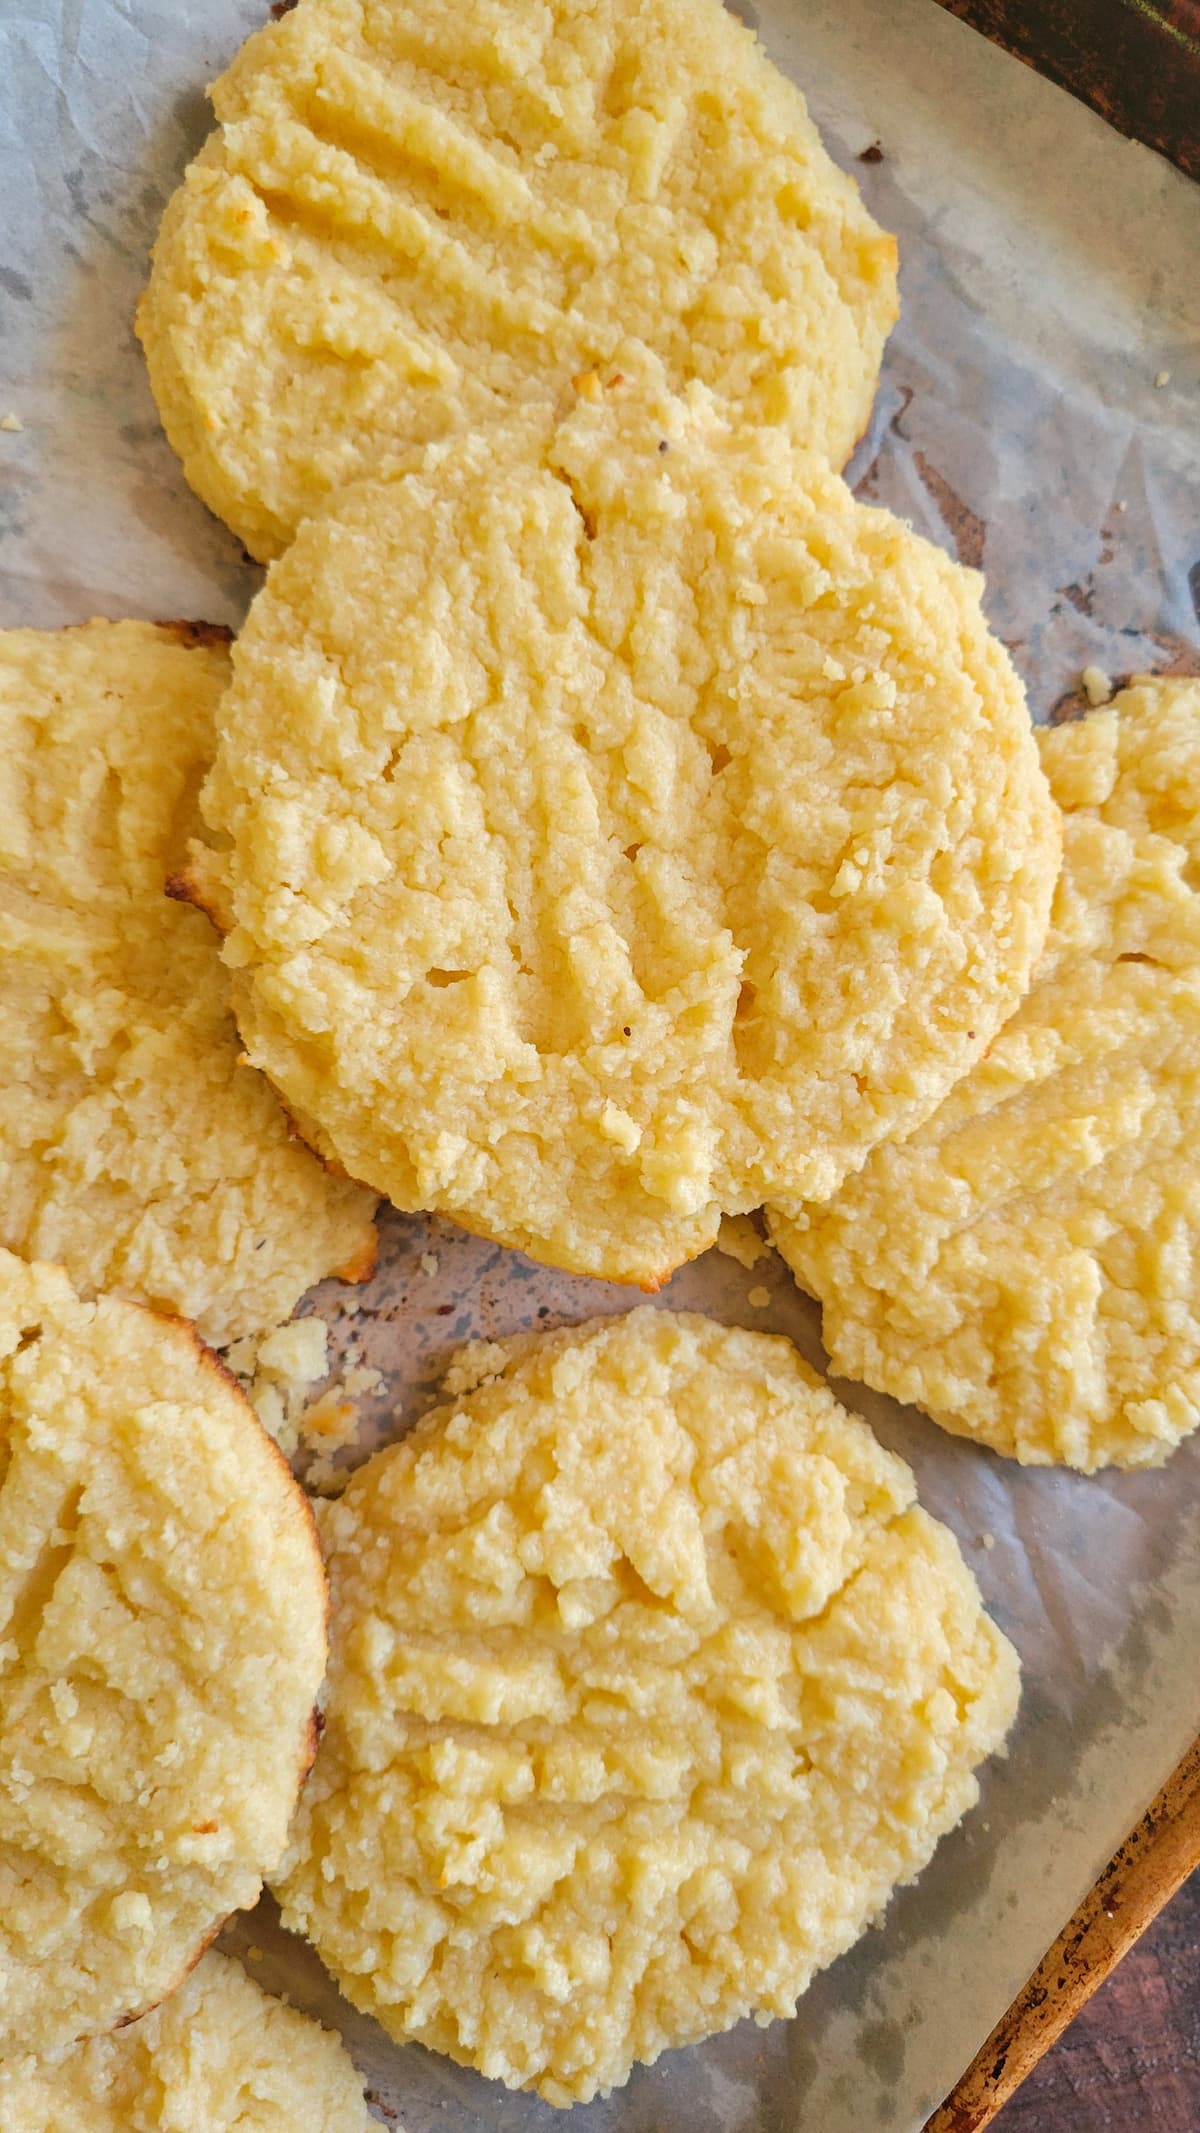 7 large yellow-ish cookies on a parchment lined baking sheet